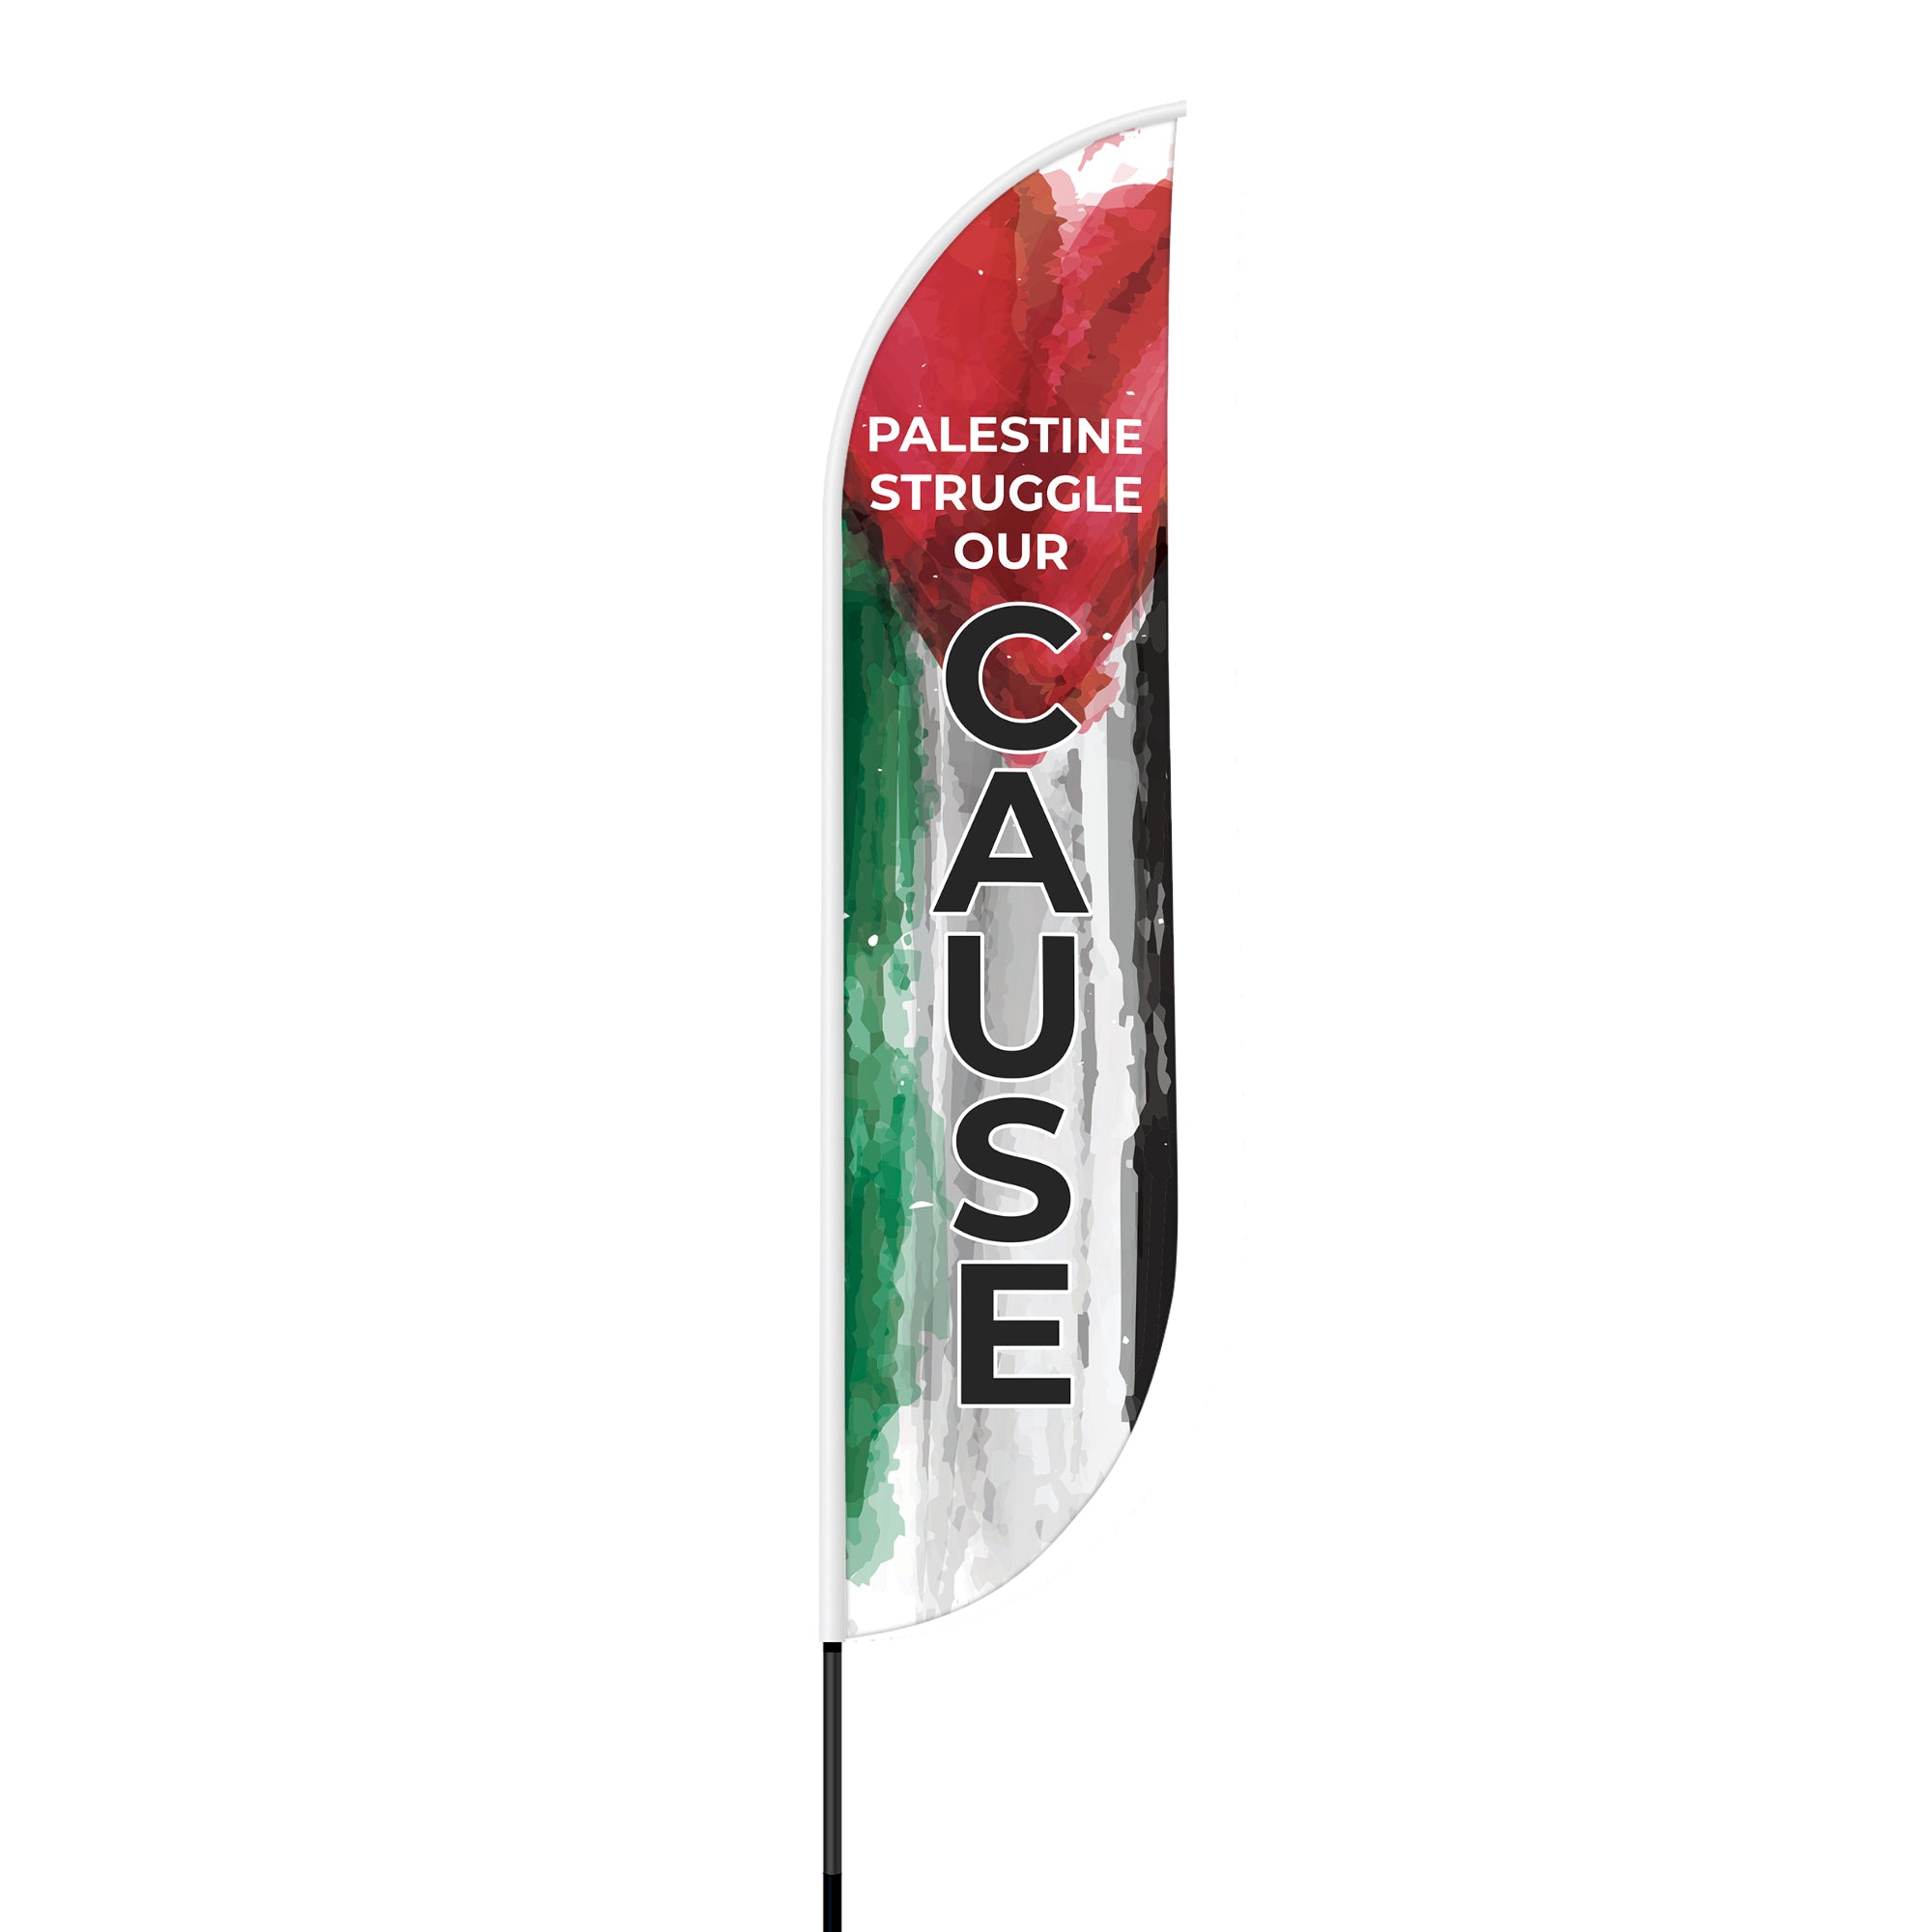 'Palestine's Struggle, Our Cause' Feather Flag – Premium Quality and Versatility